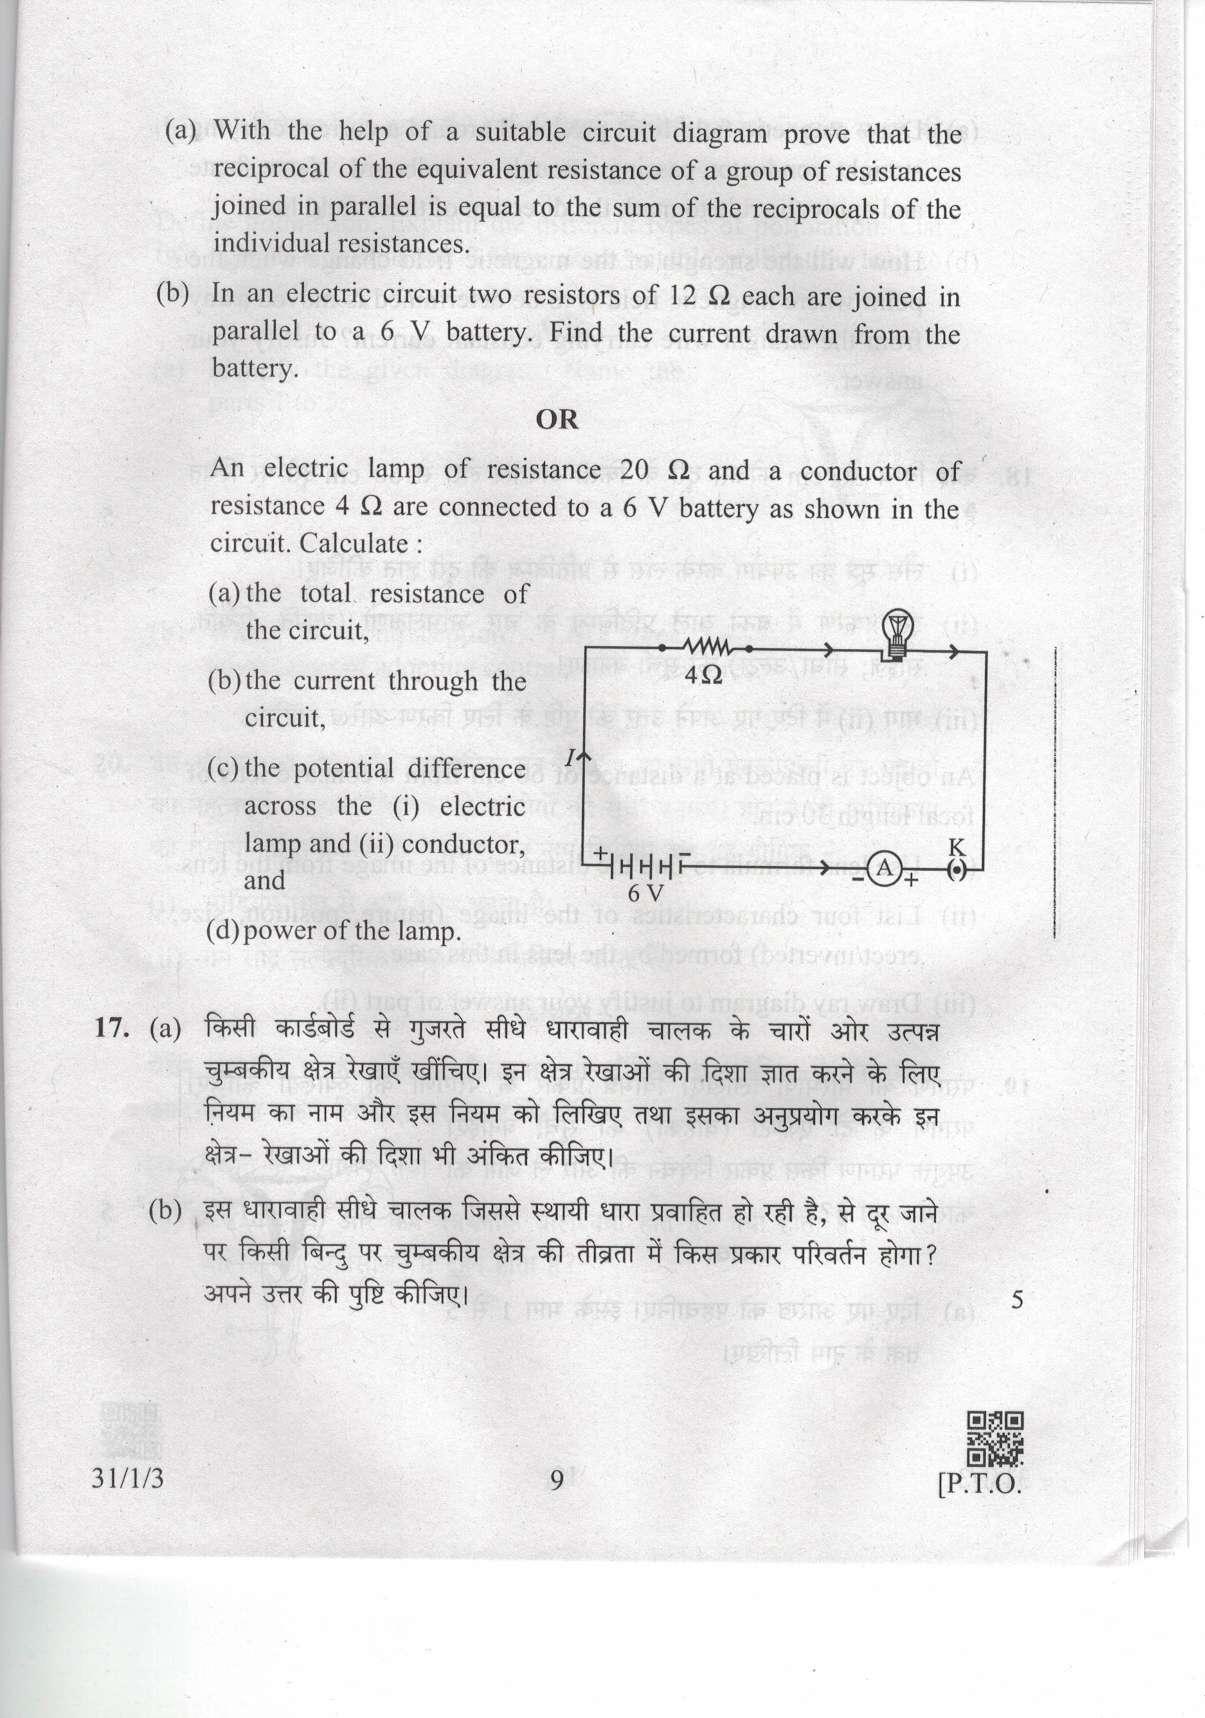 CBSE Class 10 31-1-3 Science 2019 Question Paper - Page 9